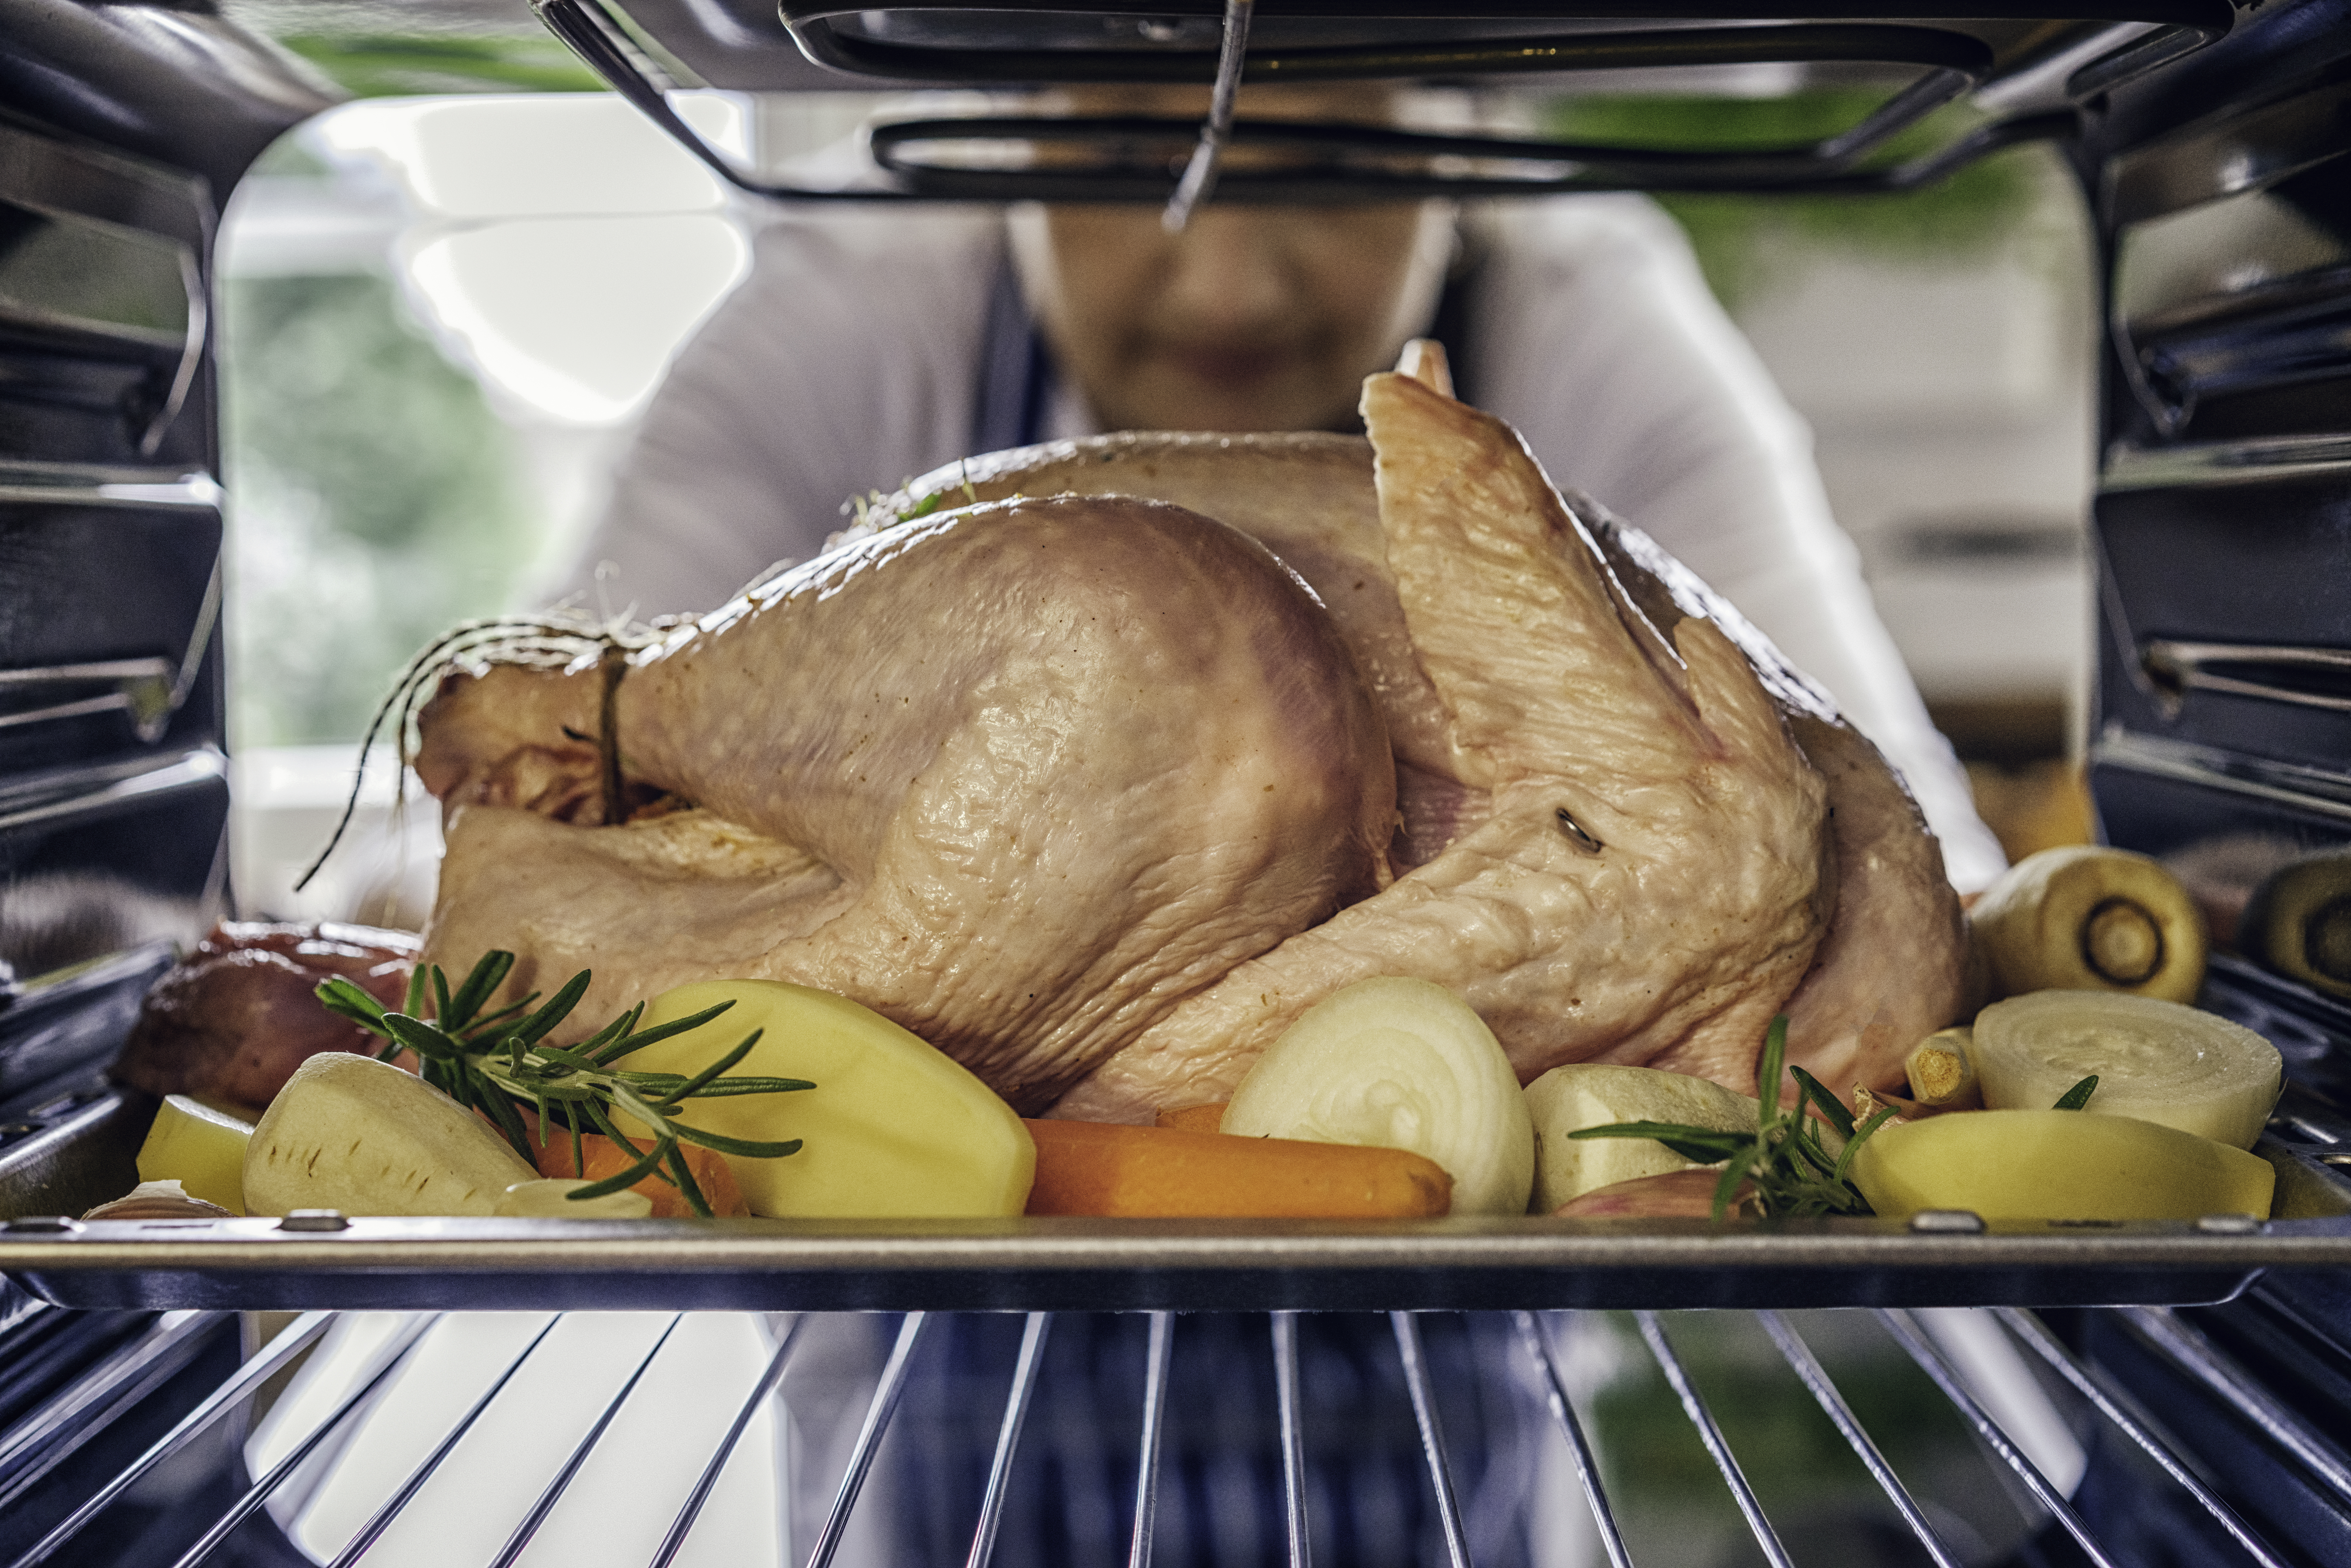 How to Thaw a Frozen Turkey (and How Not to)